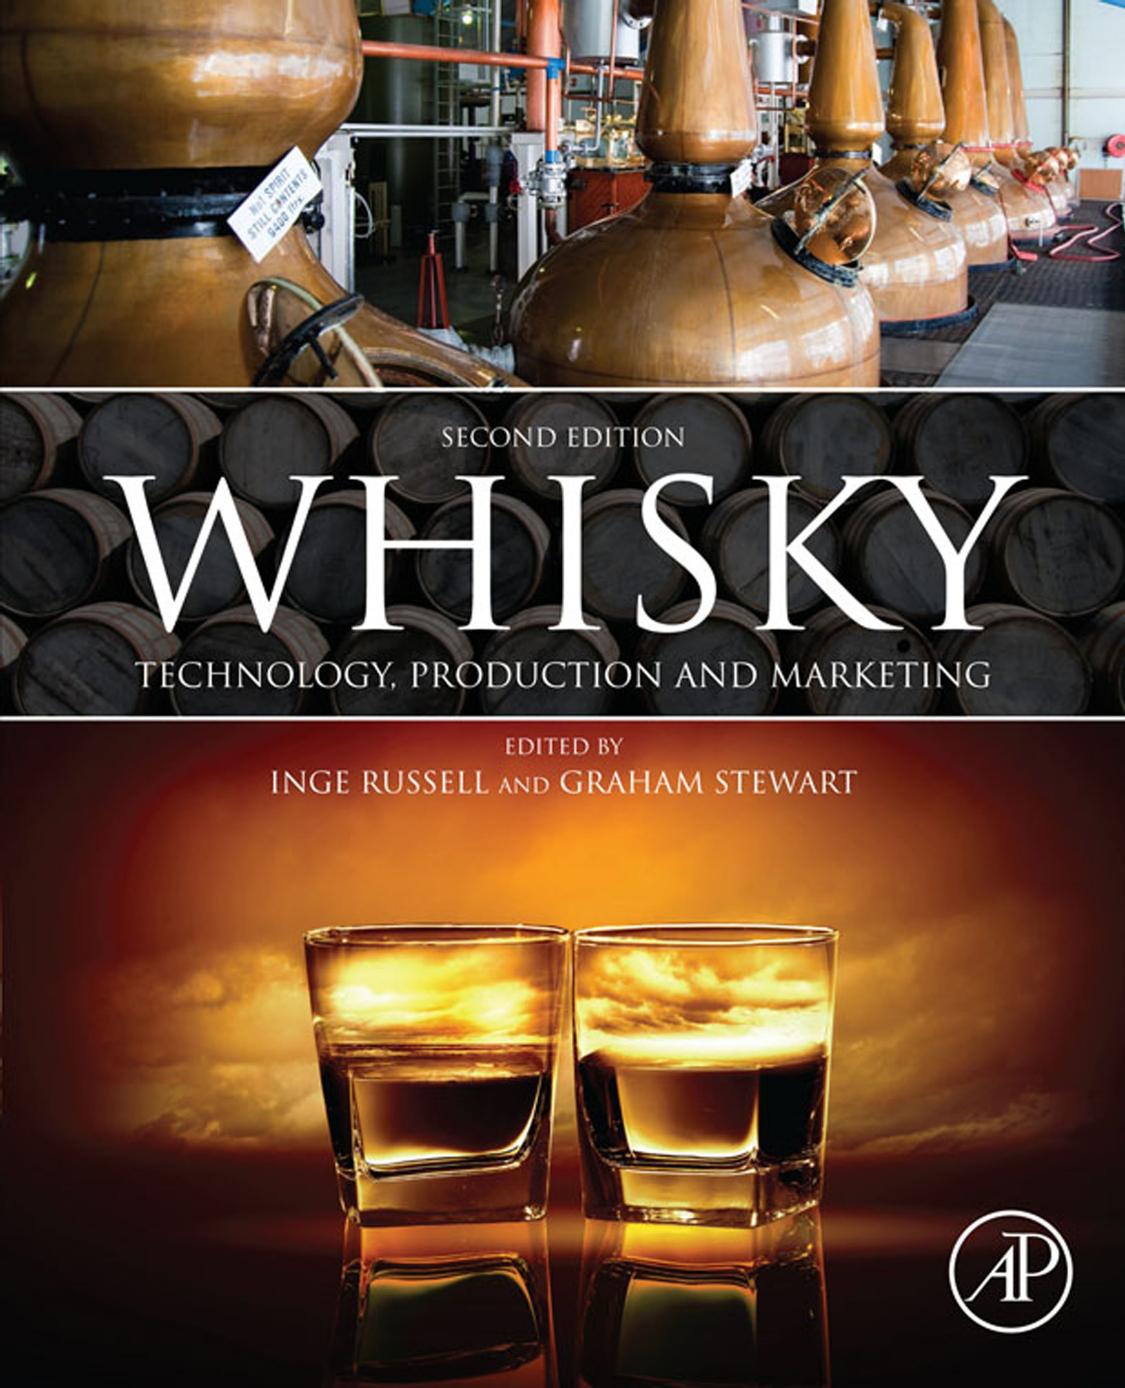 Whisky Second Edition Technology Production and Marketing - Inge Russell,Graham Stewart.jpg